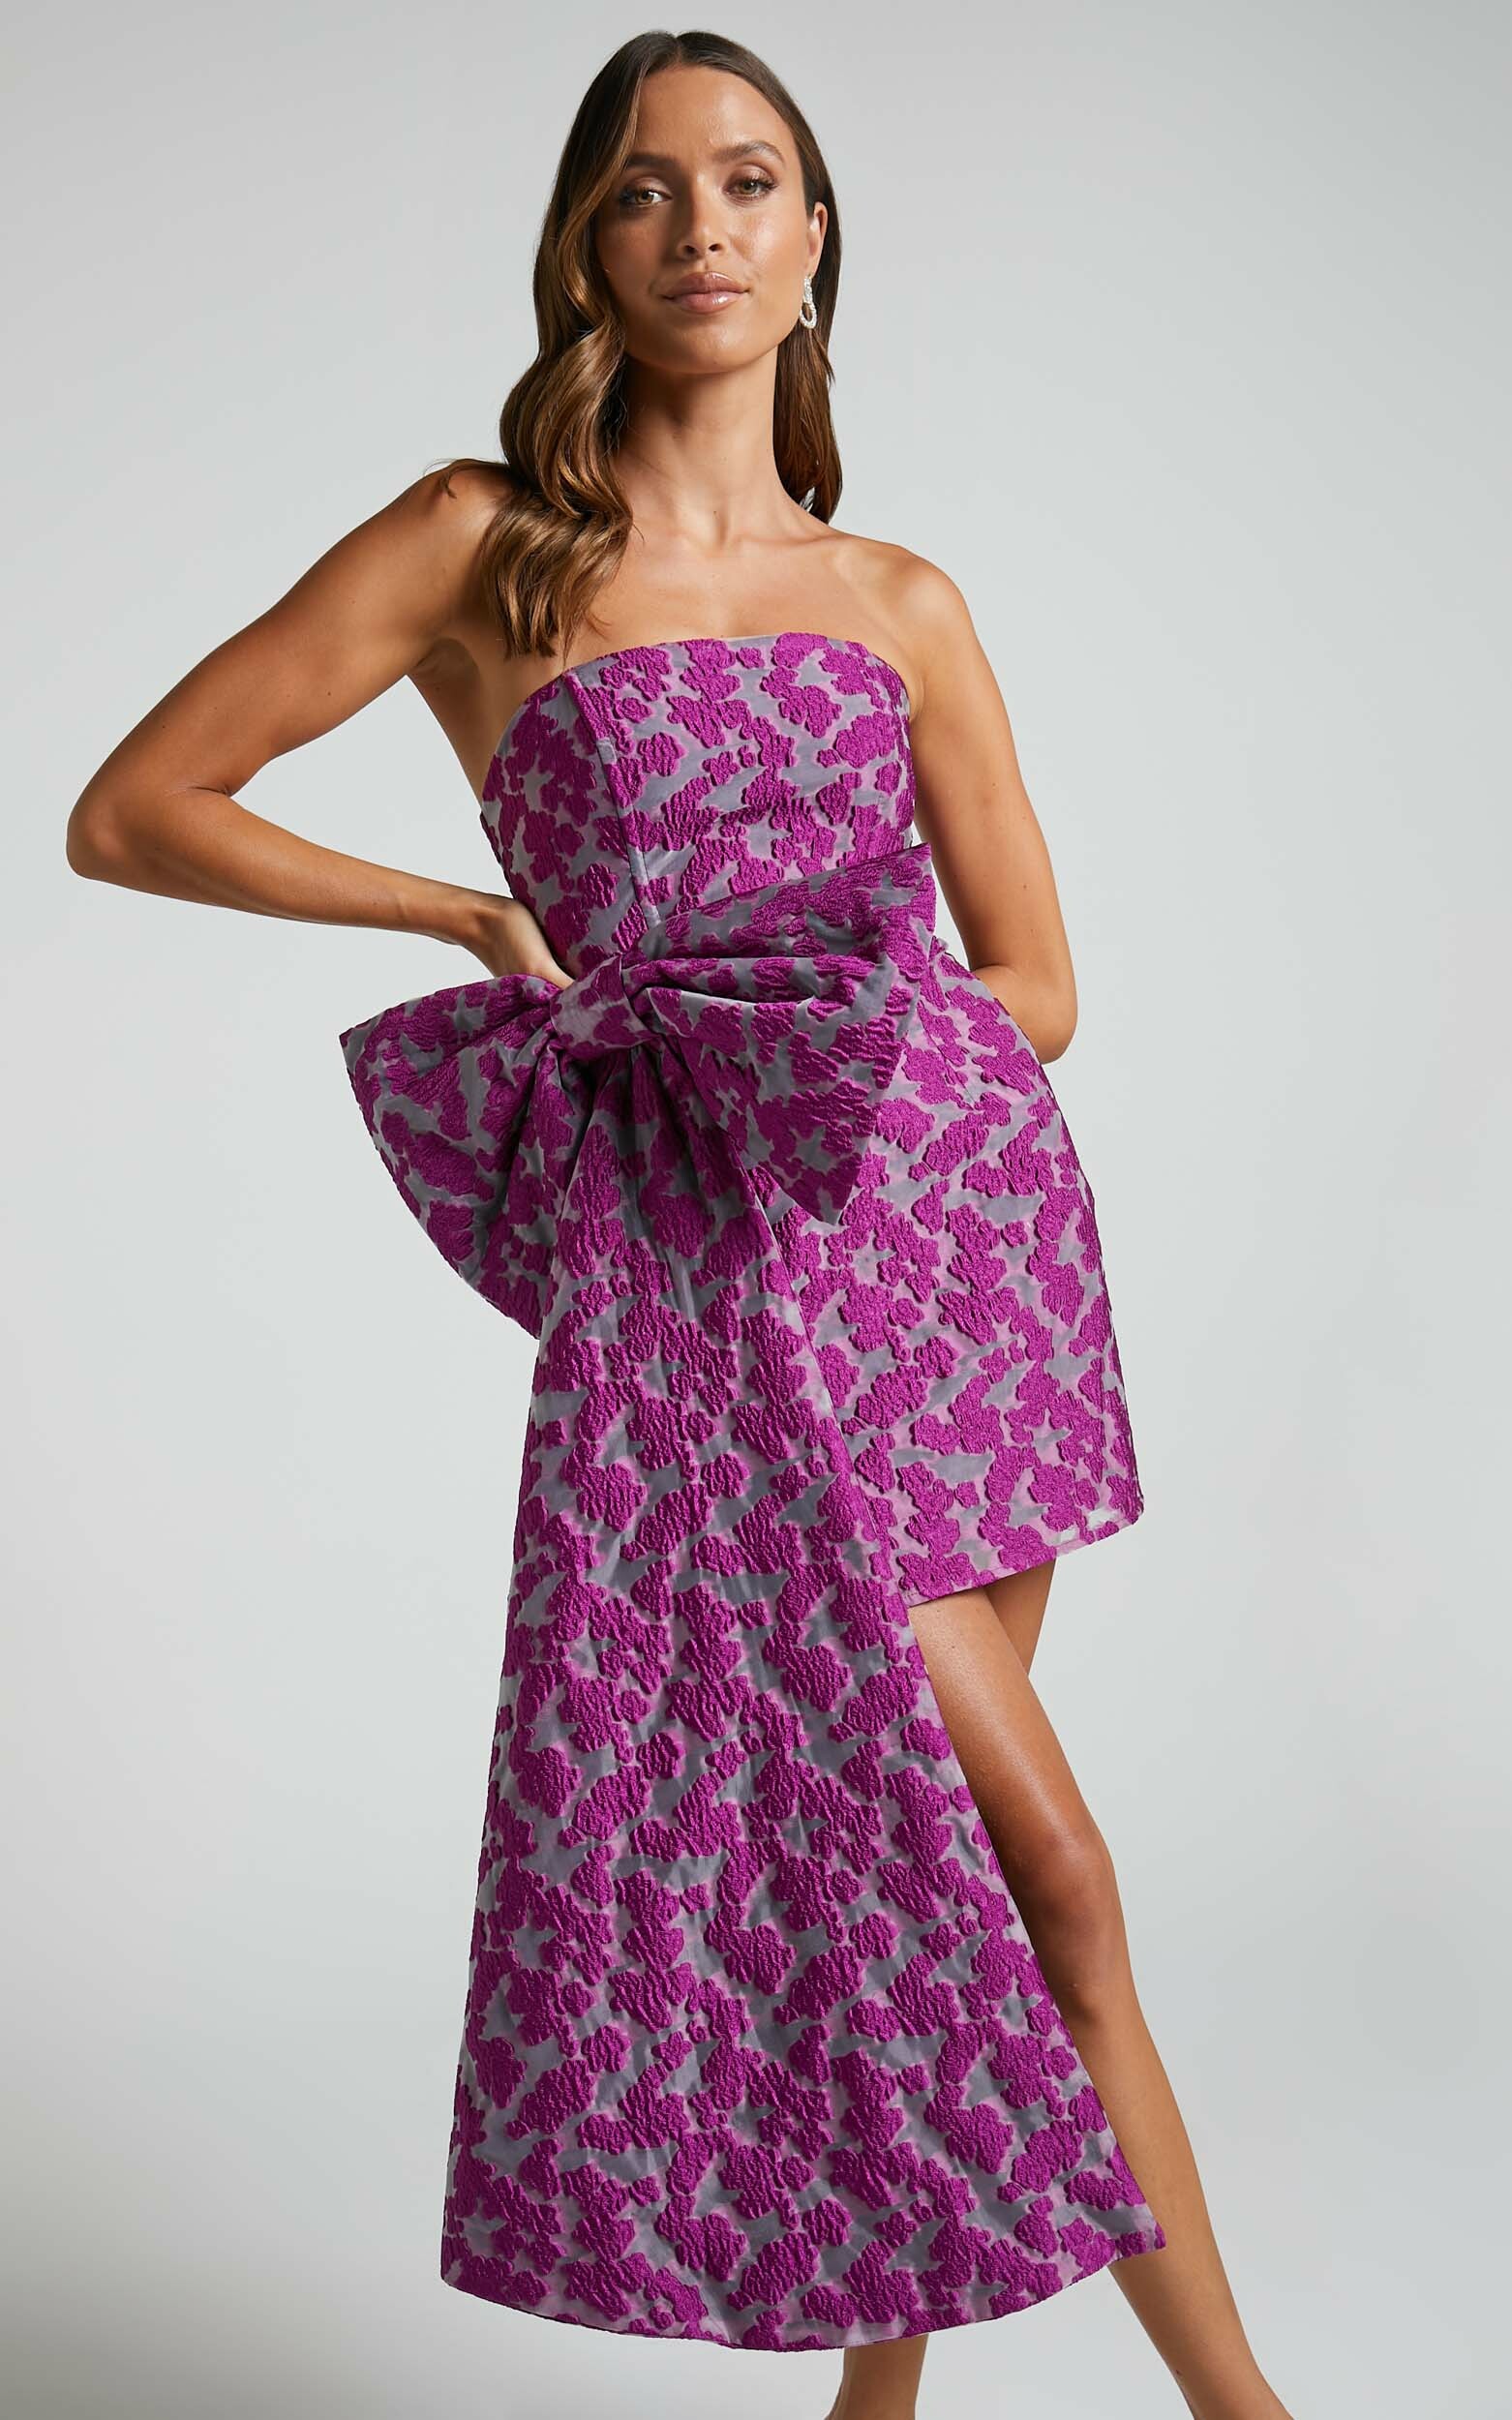 Brailey Mae Mini Dress - Side Bow Strapless Dress in Purple Jacquard - 04, PNK1, hi-res image number null